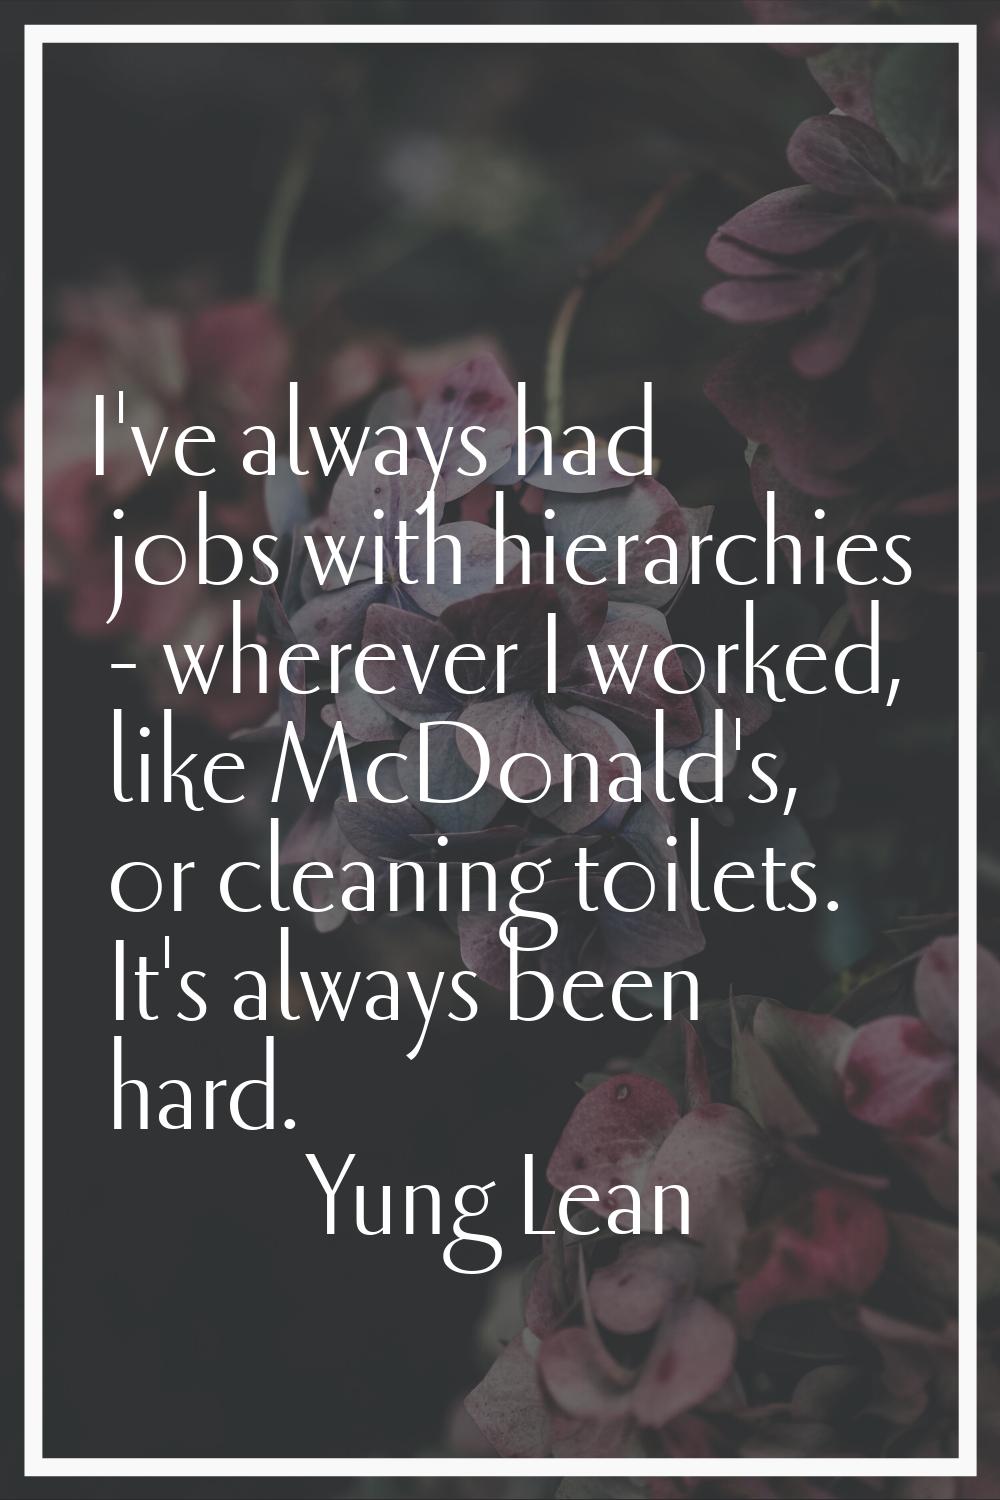 I've always had jobs with hierarchies - wherever I worked, like McDonald's, or cleaning toilets. It